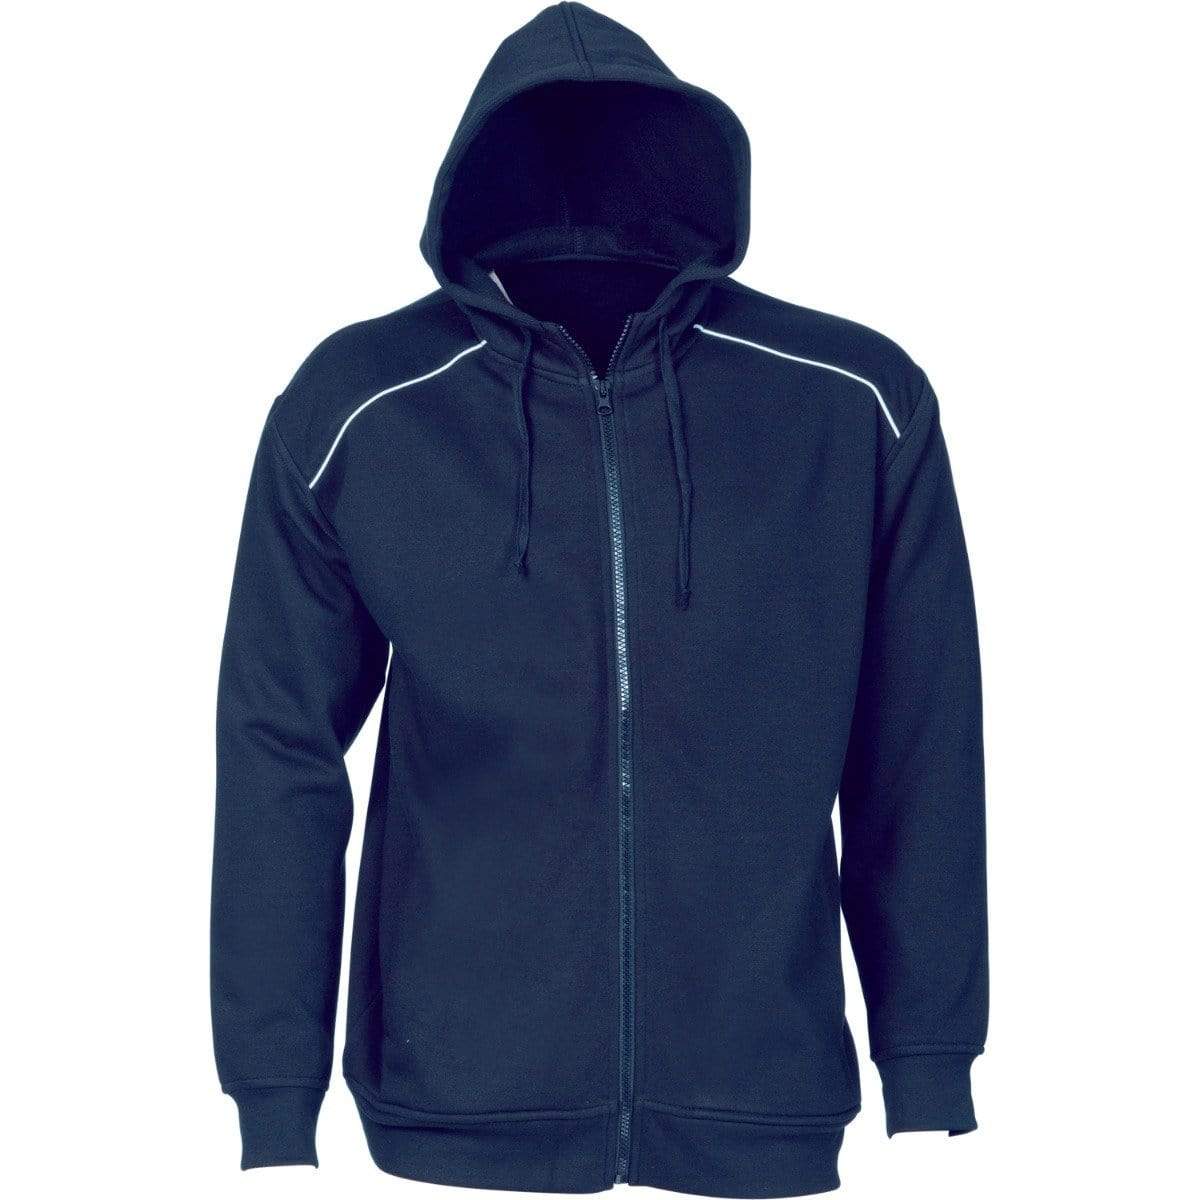 Dnc Workwear Men’s Contrast Piping Fleecy Hoodie - 5422 Active Wear DNC Workwear Navy/White S 